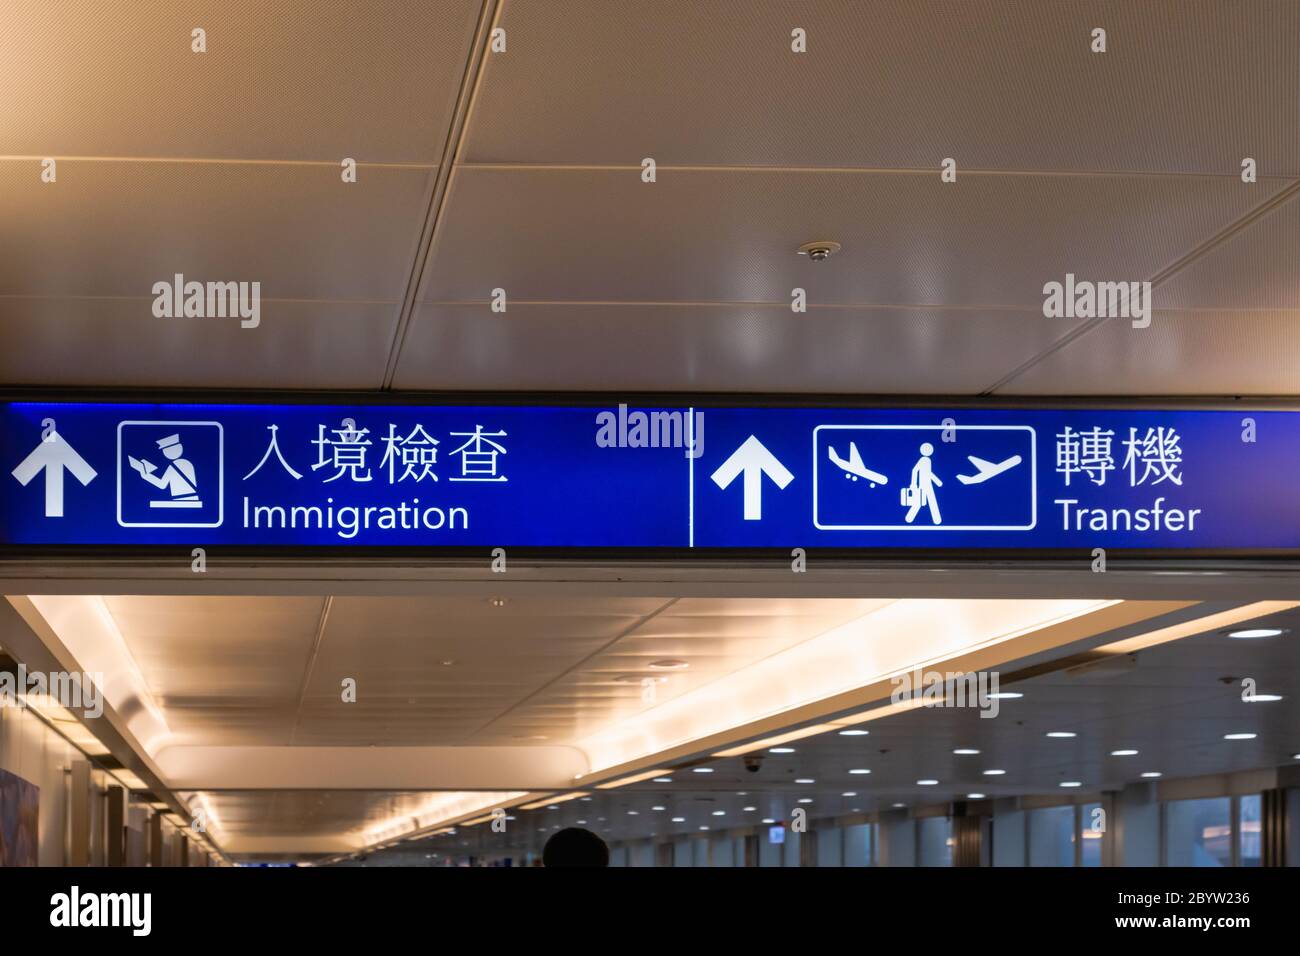 Airport transfer sign - immigration sign and international flight transfer information sign / icon at airport in English and Chinese Stock Photo